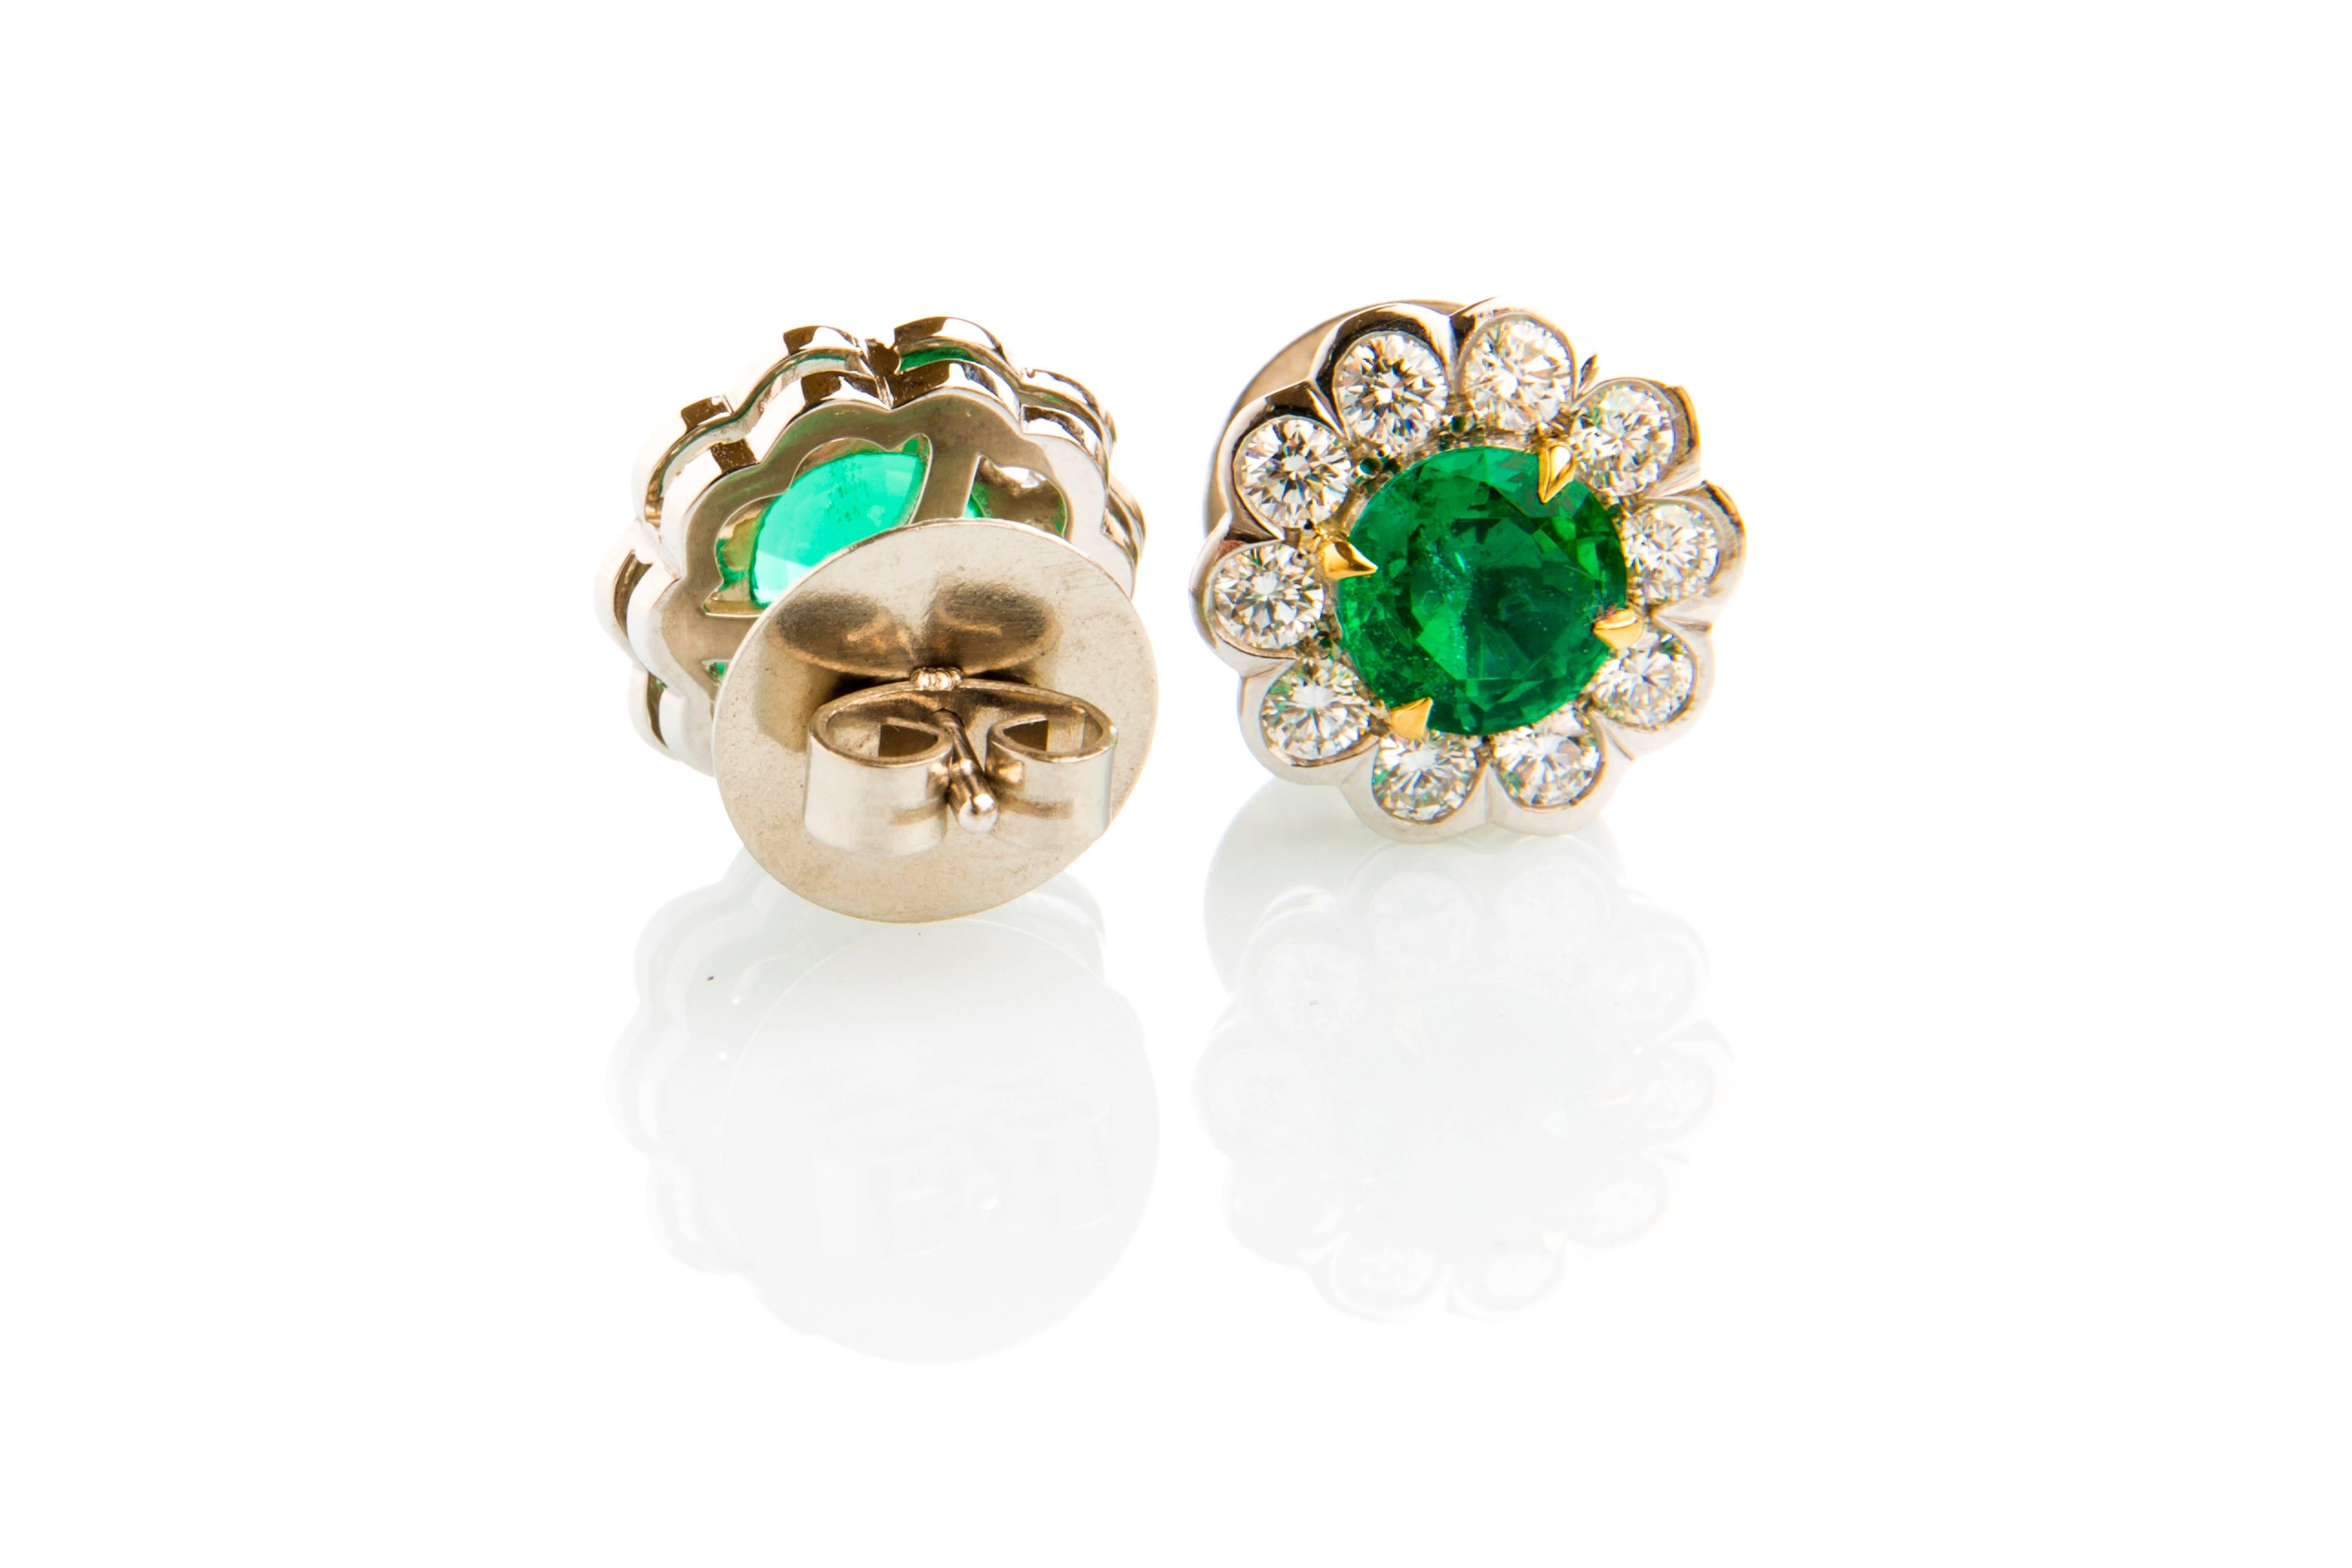 flower shaped pair of round emerald and round diamond cluster earrings 
2 Zambian Emerald (no oil) 1.83ct
20 round diamonds 1.13ct
18k white gold
come with studs